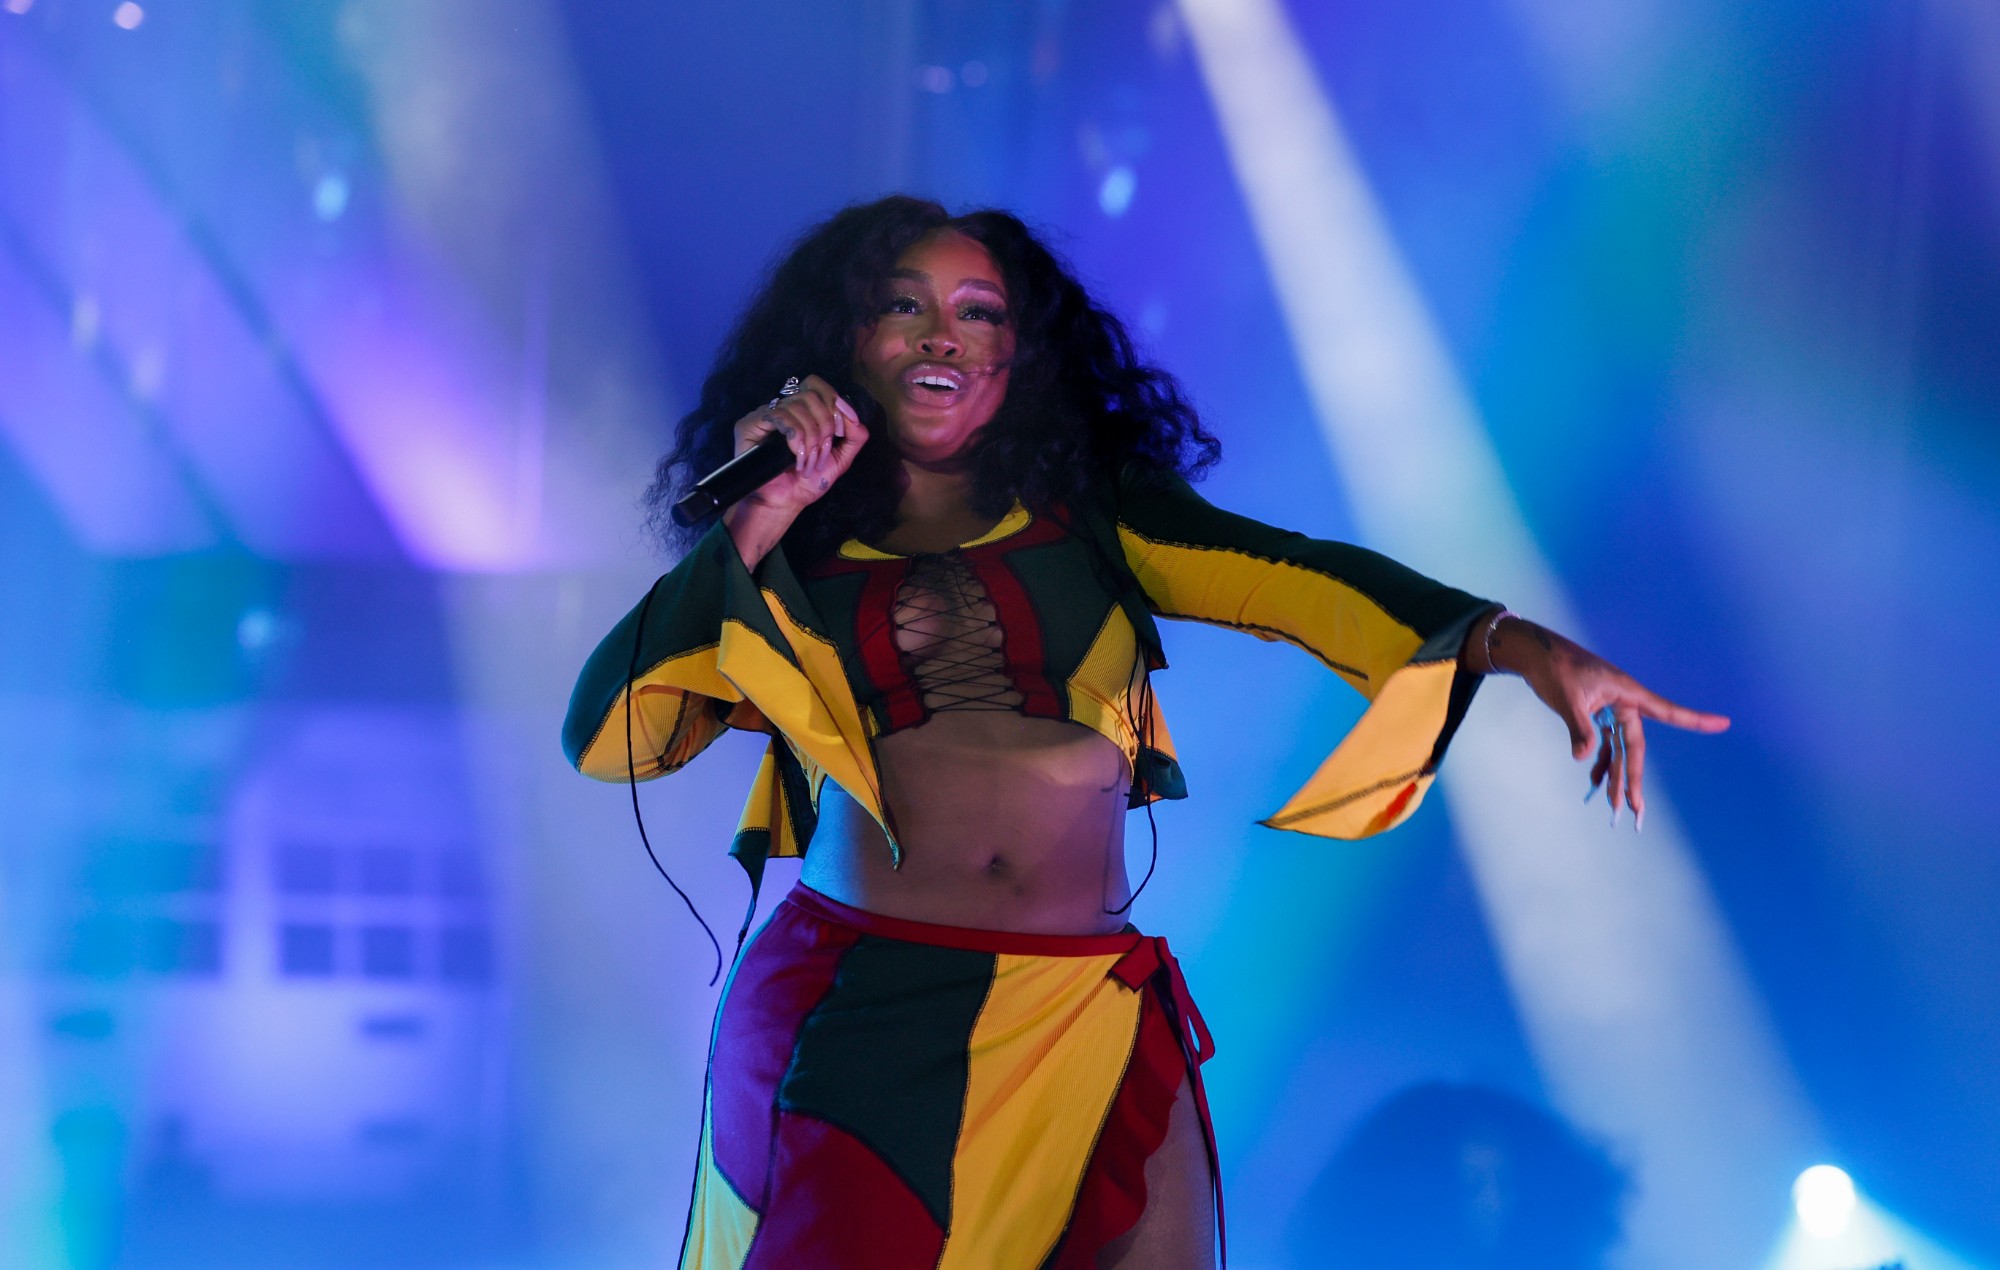 On SOS, SZA Proves She's One of This Generation's Best Songwriters